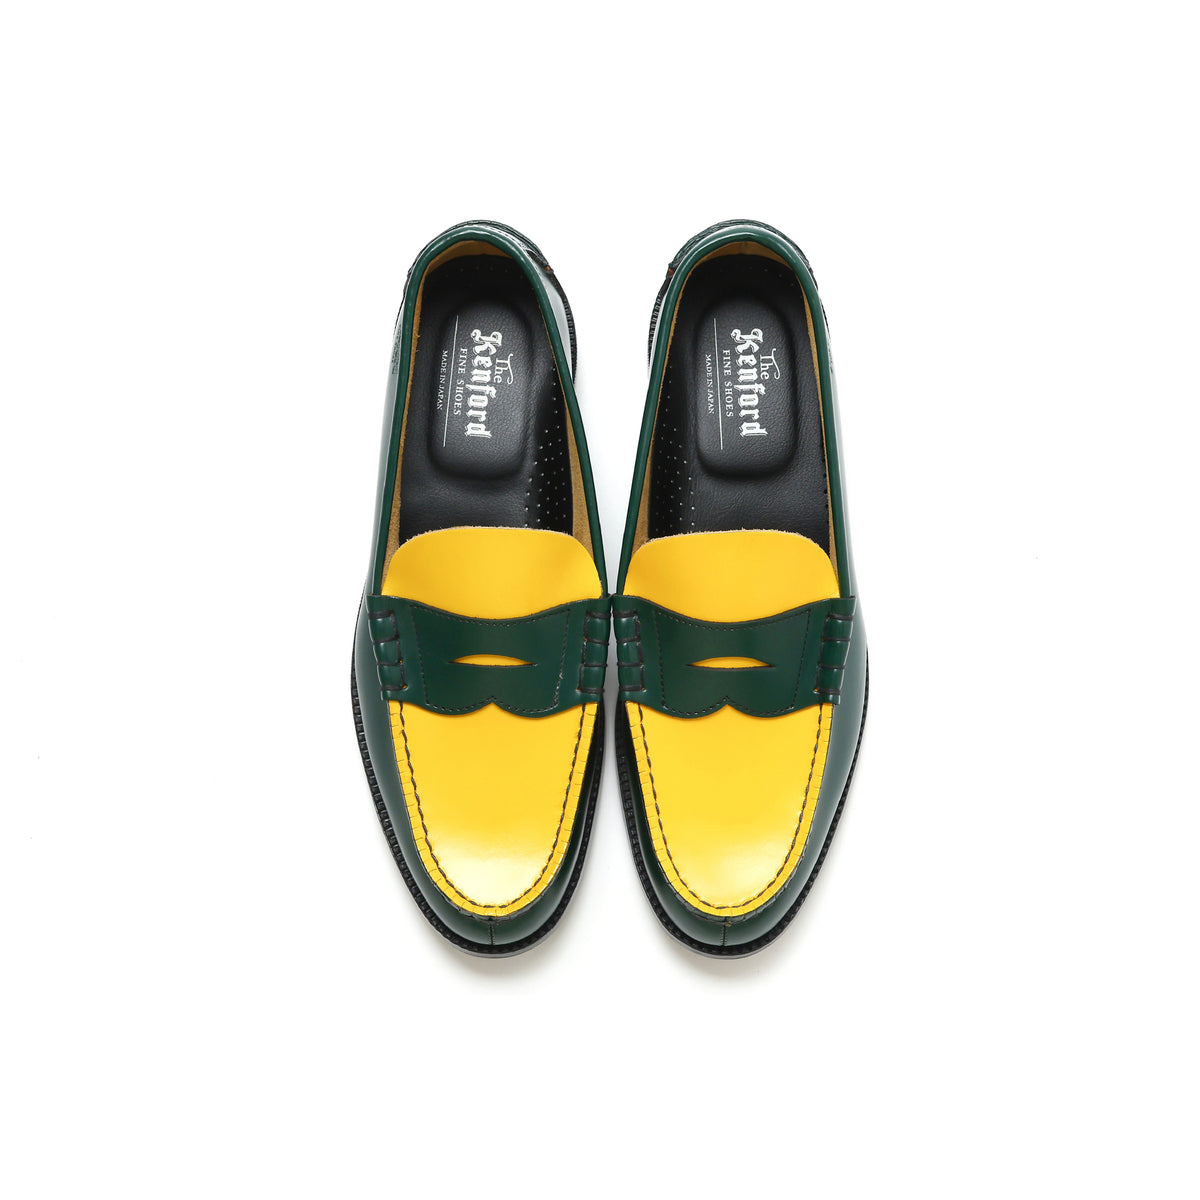 MENS COMBI LOAFERS / GREEN YELLOW